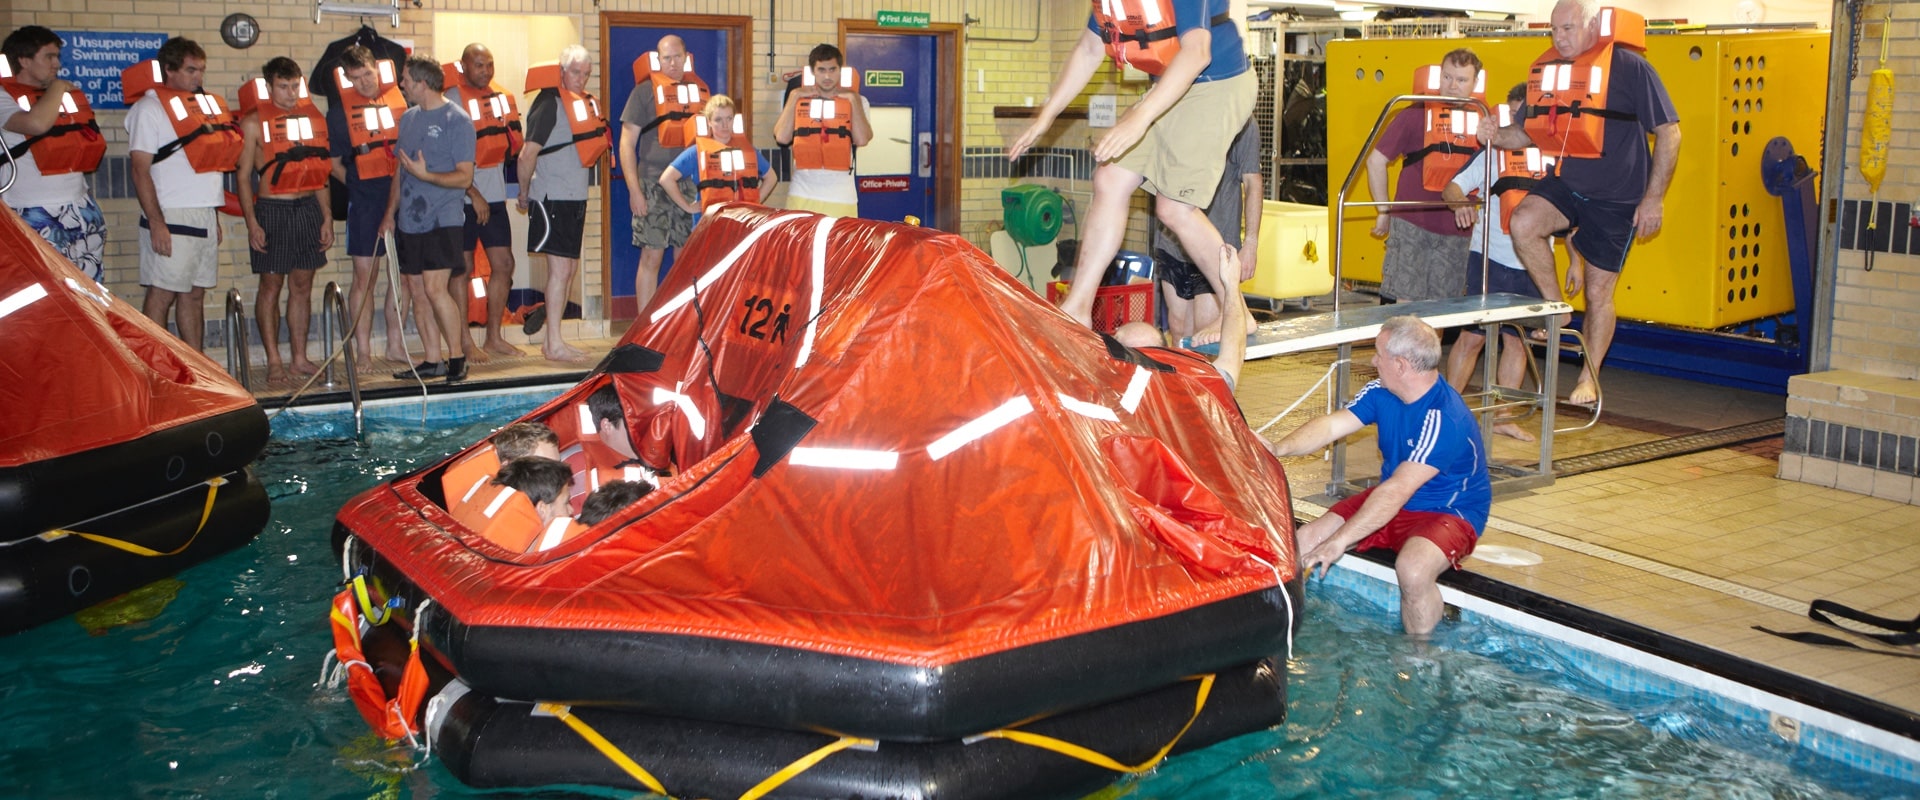 Seafarers in clothes undertaking safety training in swimming pool with life raft